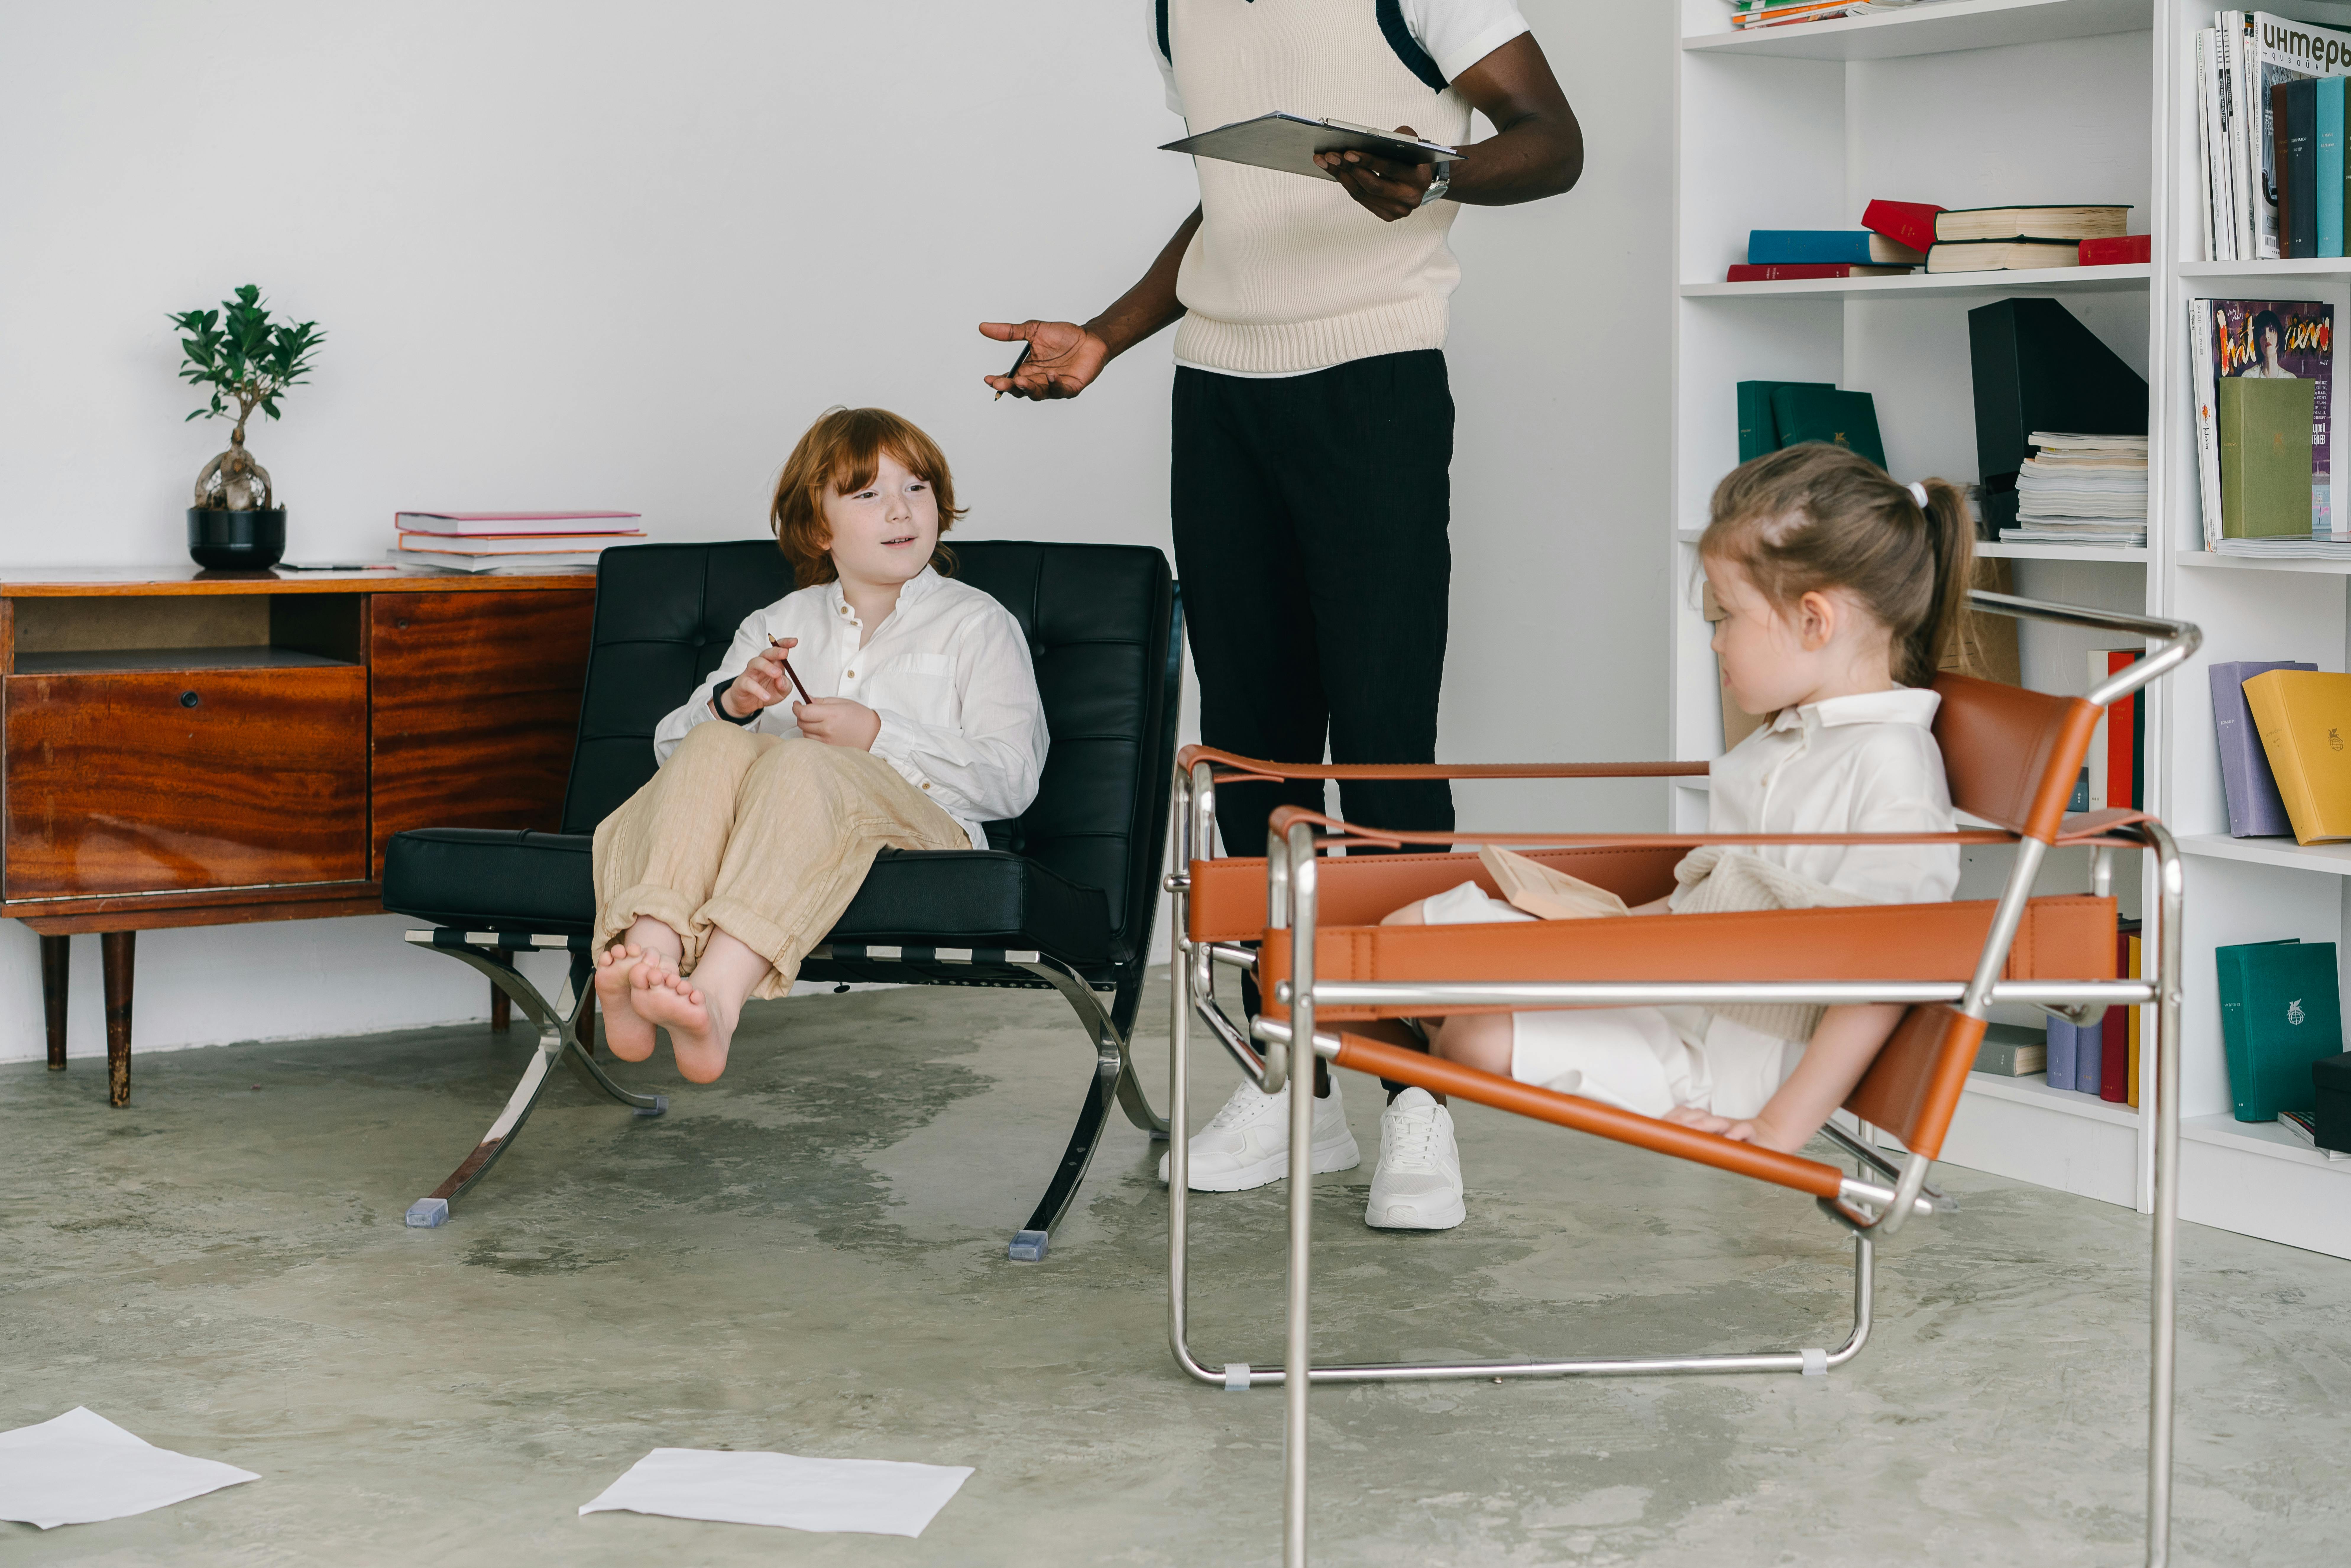 Kids in therapy | Source: Pexels